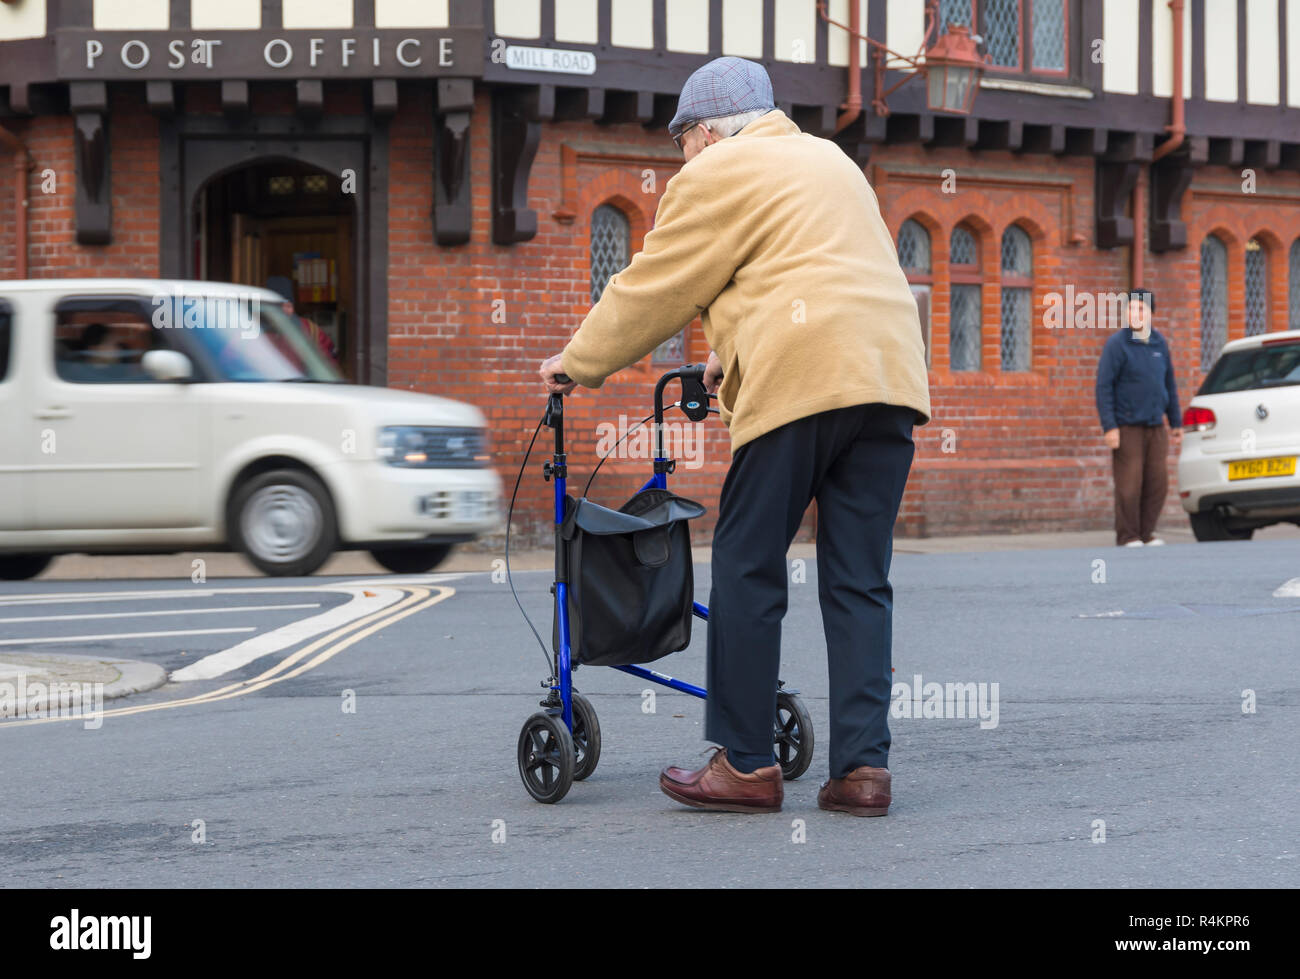 Elderly man walking across a road assisted by a 3 wheeled walker in the UK. Senior person shopping with wheeled walking frame. Stock Photo